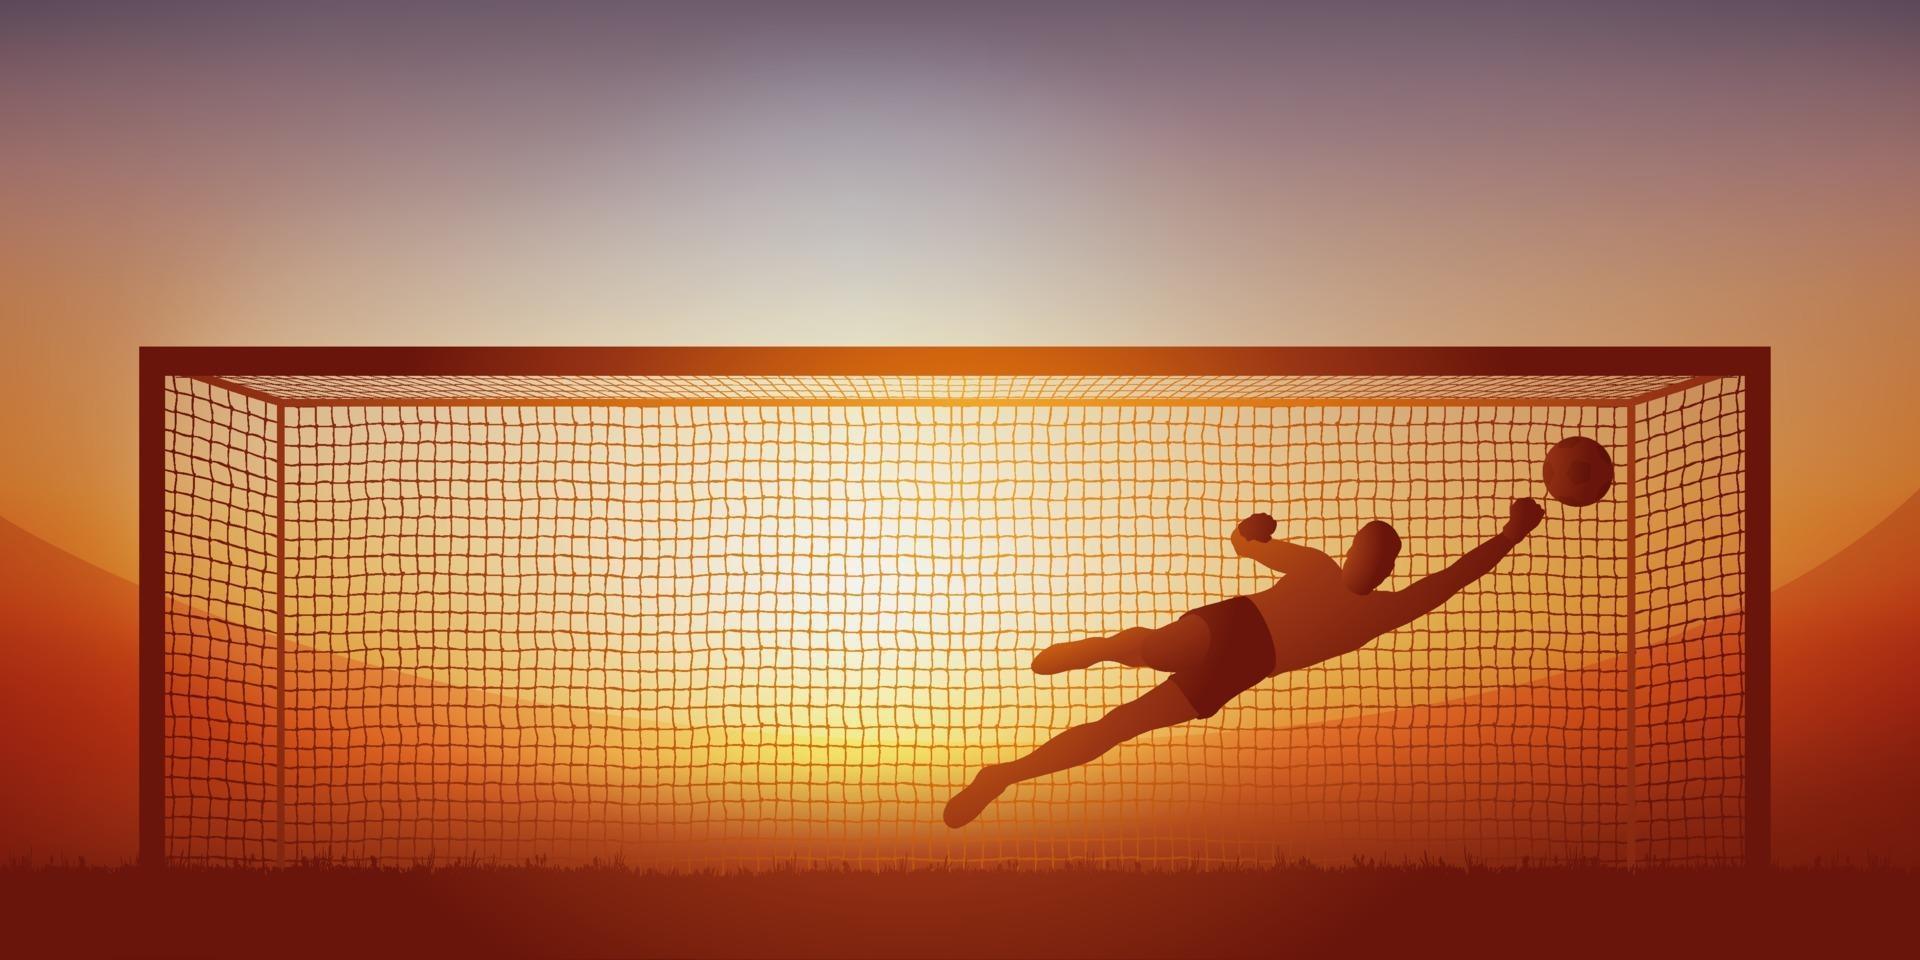 Goalkeeper stoppage during a football match vector